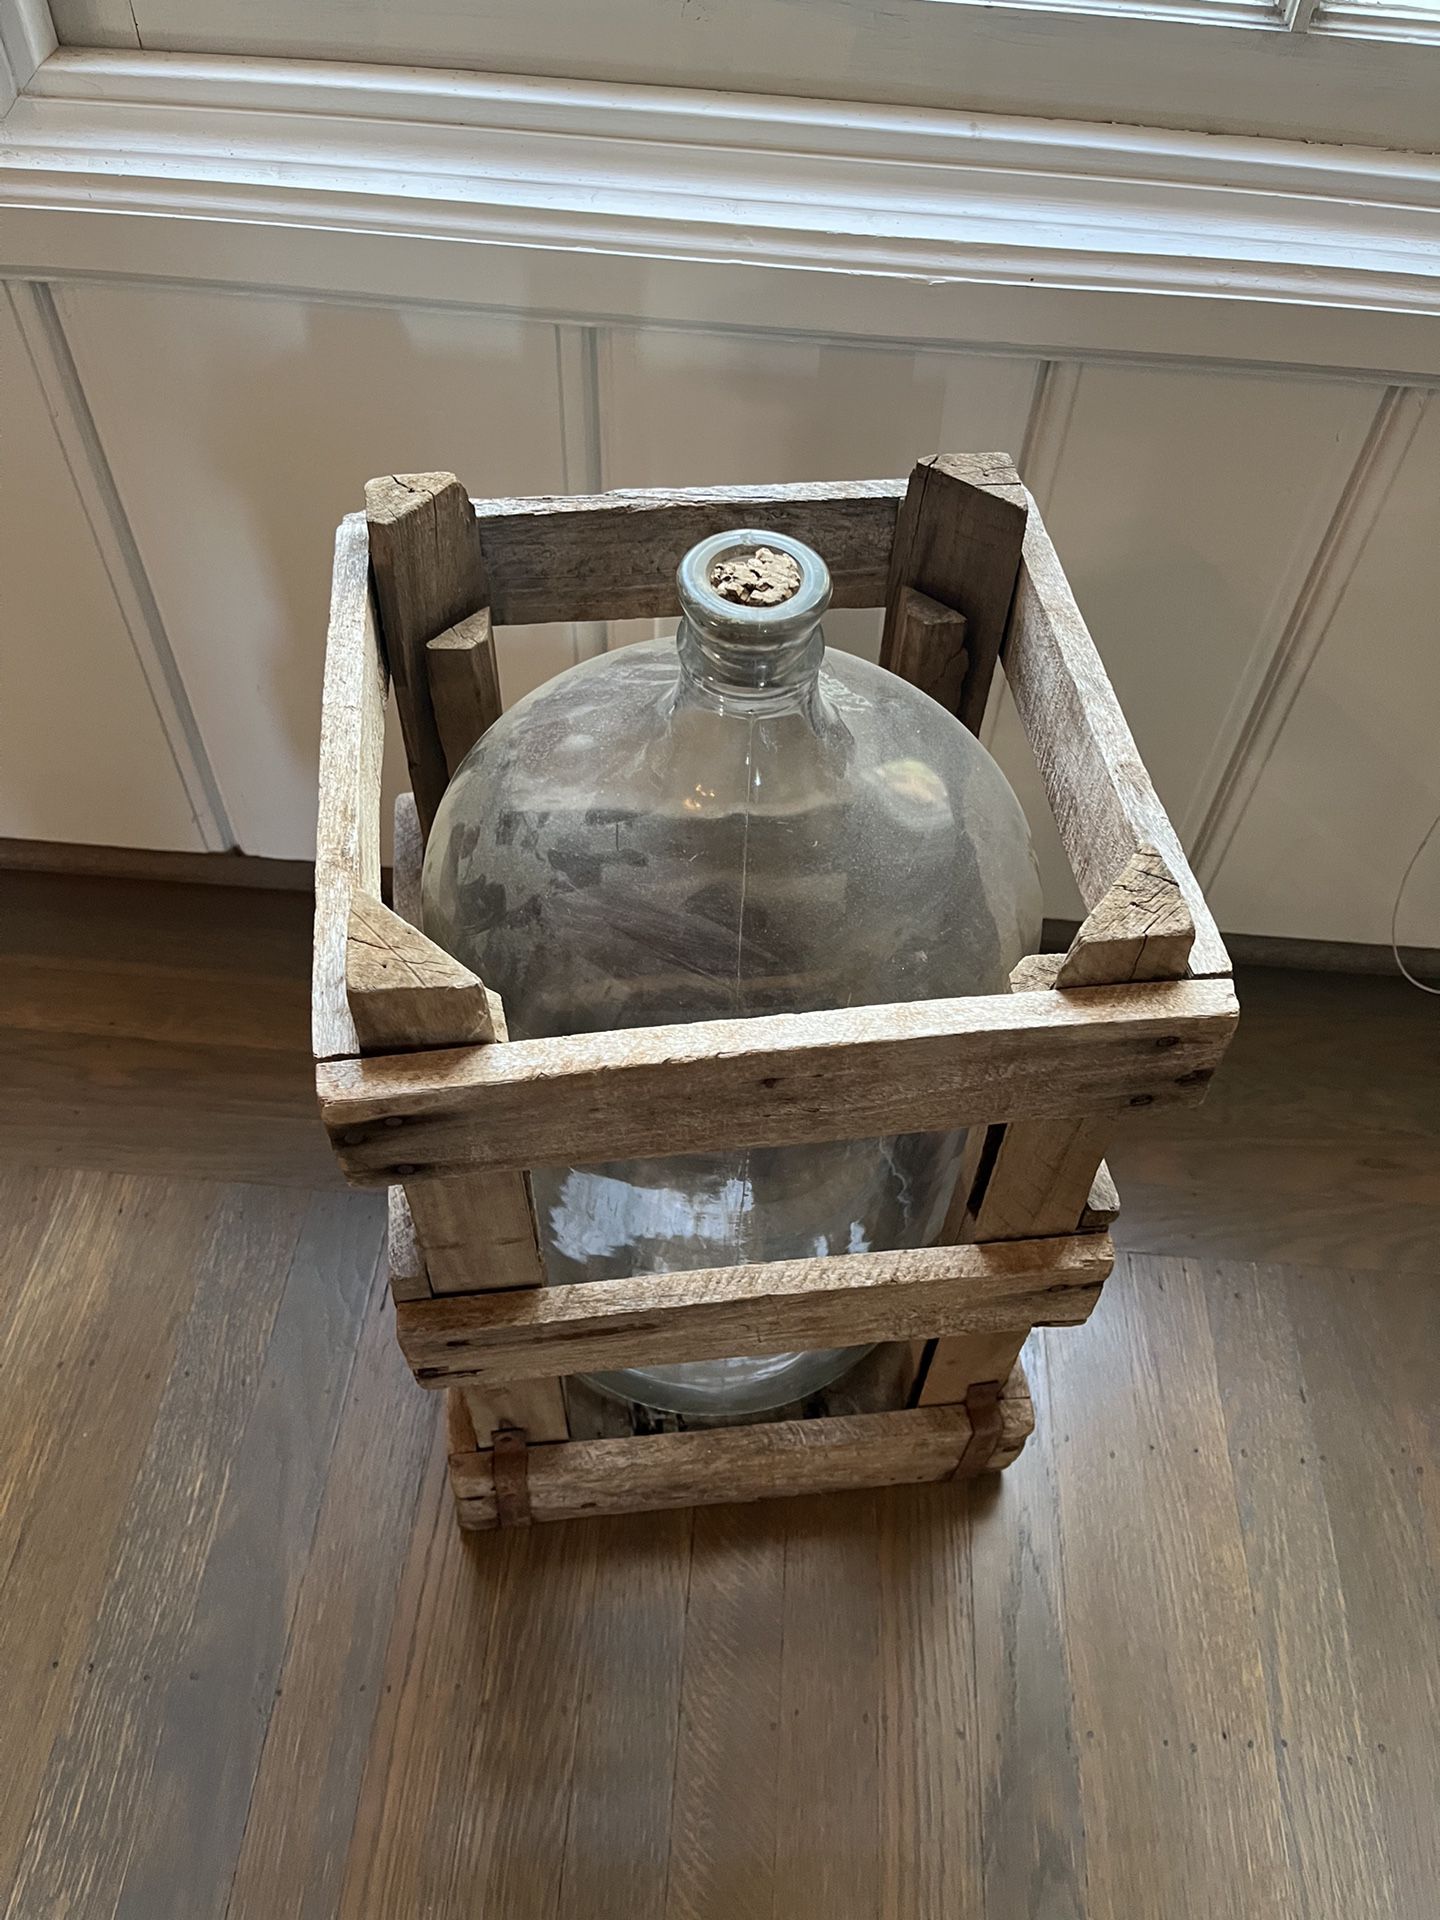 ANTIQUE GLASS WATER JUG BOTTLE 5 GALLON  IN WOODEN CRATE